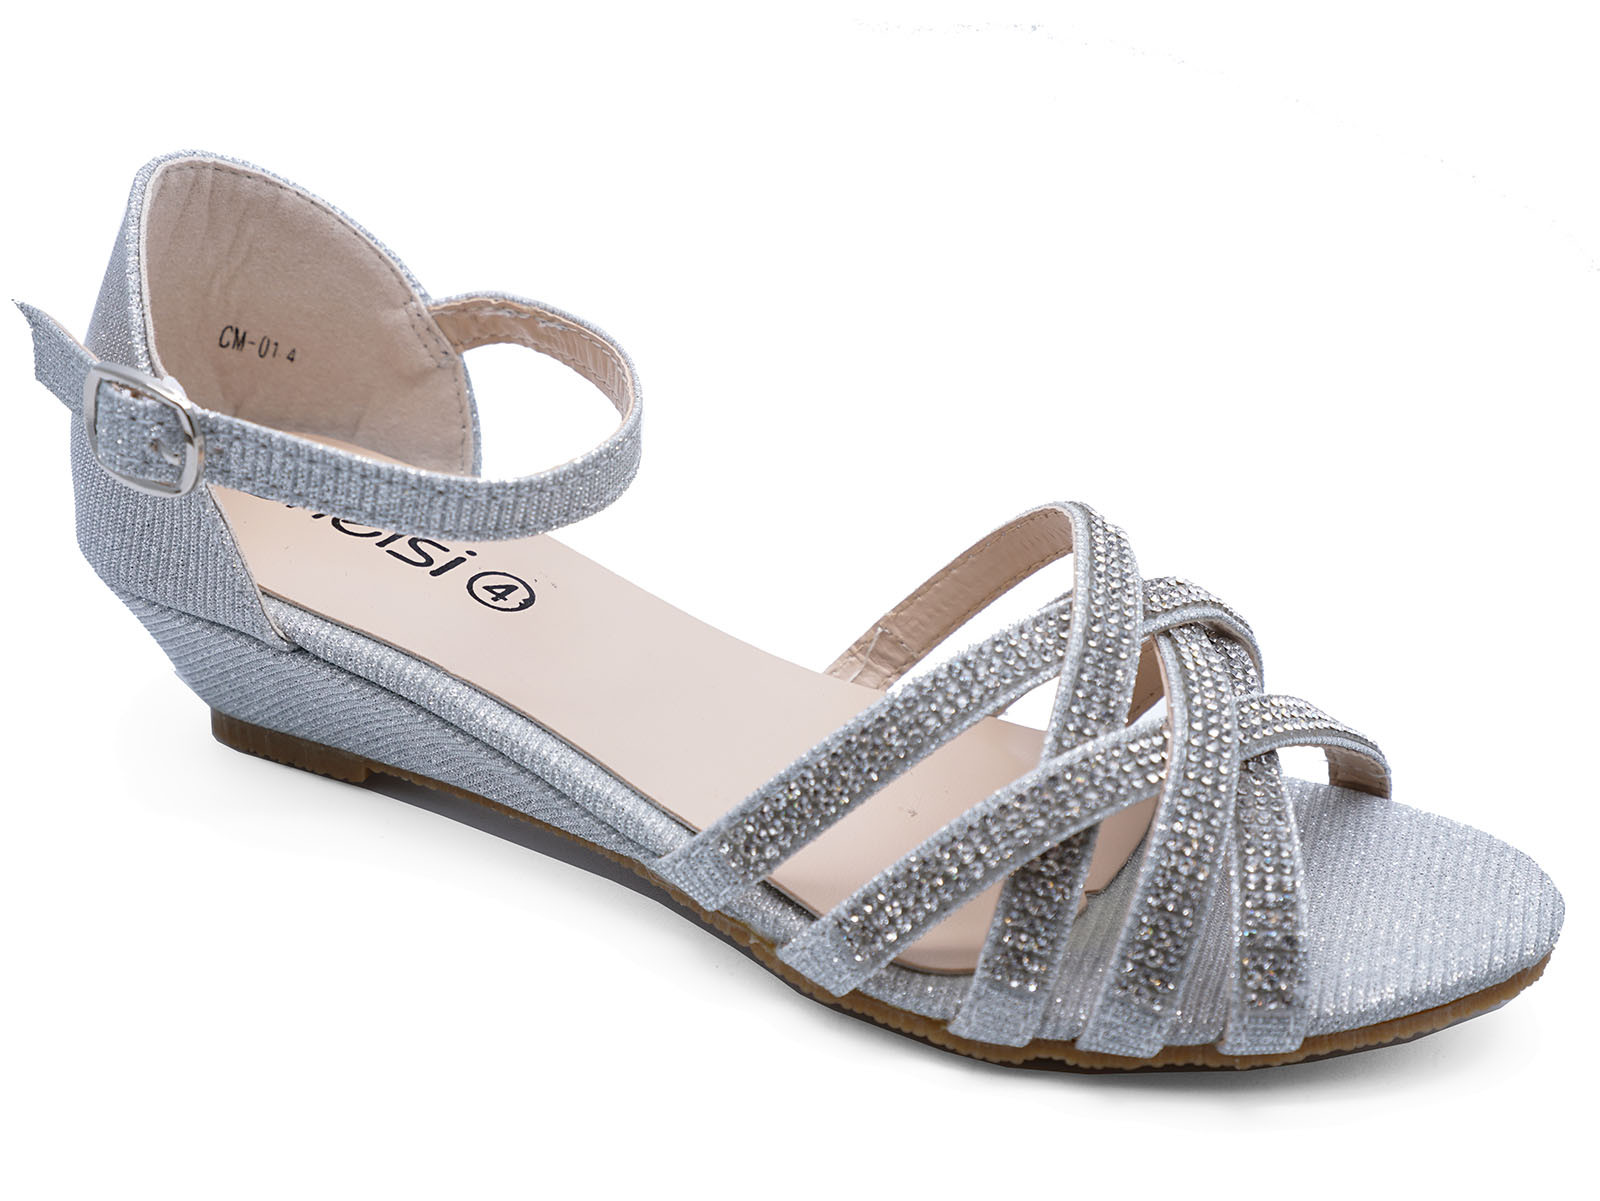 Silver Wedding Shoes For Bridesmaids
 LADIES SILVER WEDDING BRIDAL BRIDESMAID DIAMANTE WEDGE